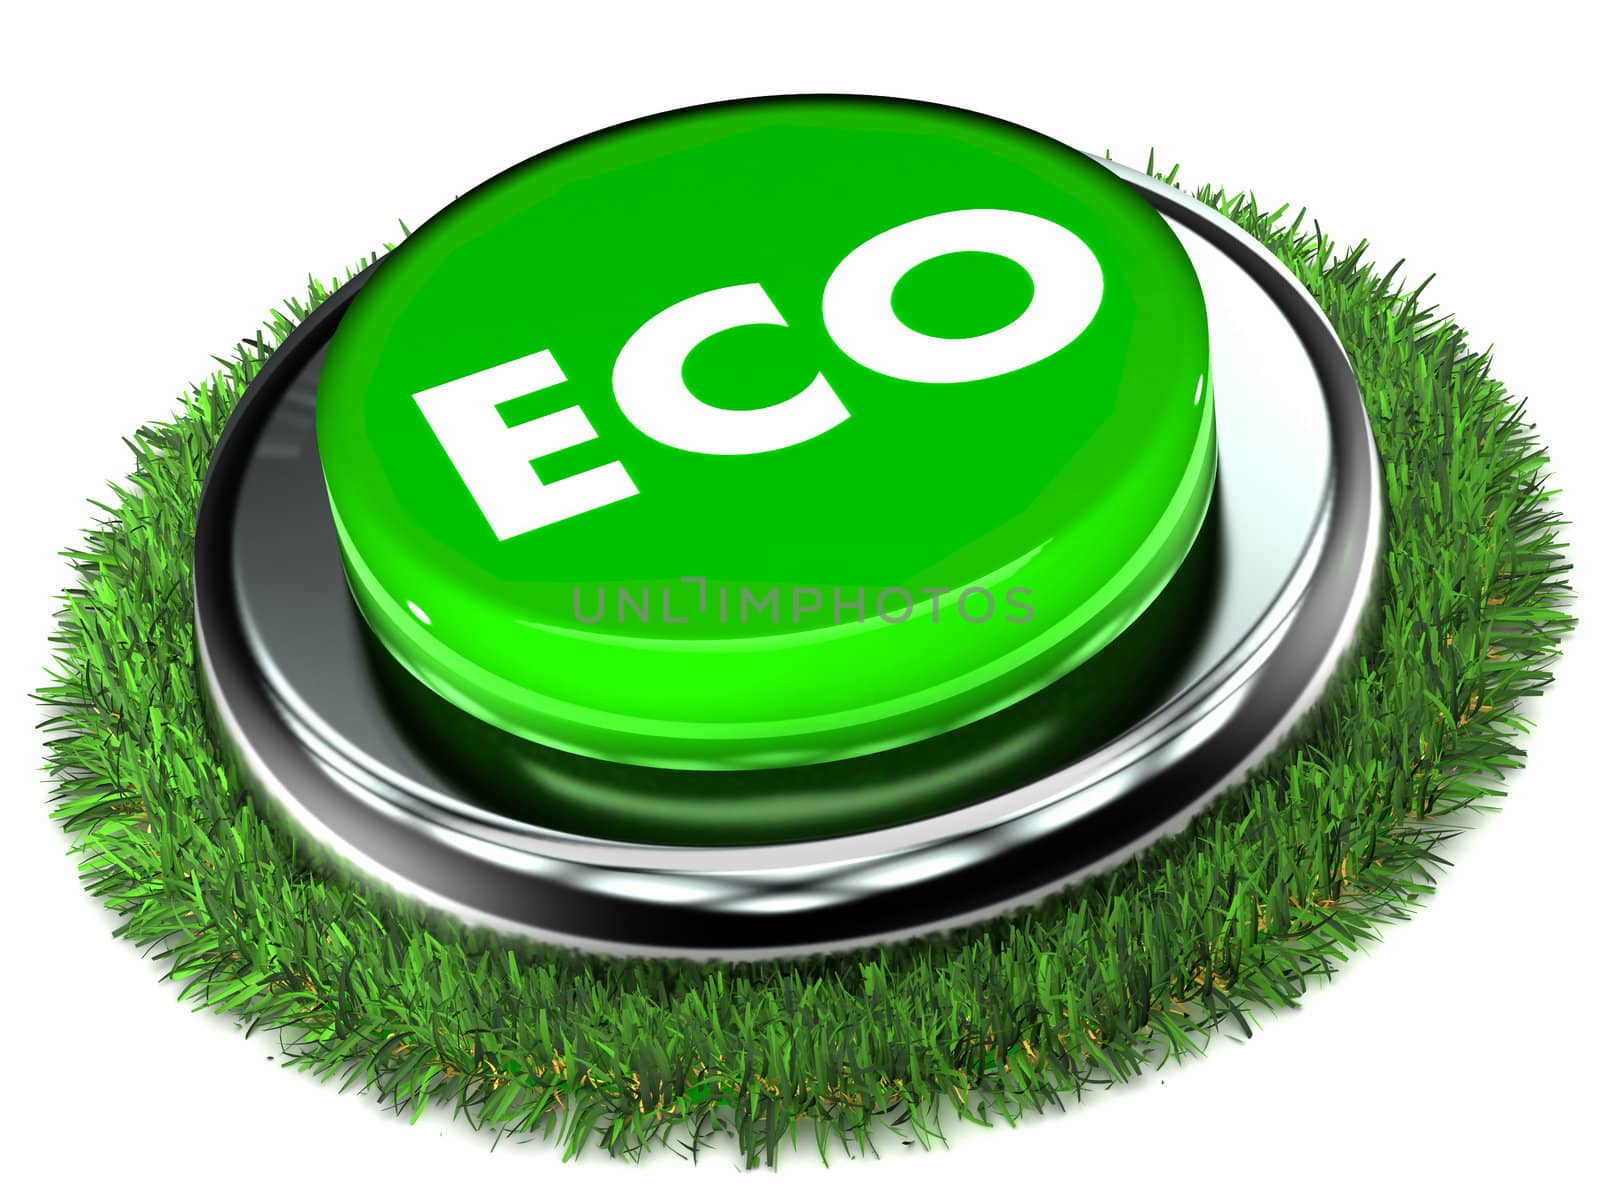 A Colourful 3d Rendered Eco Button Illustration